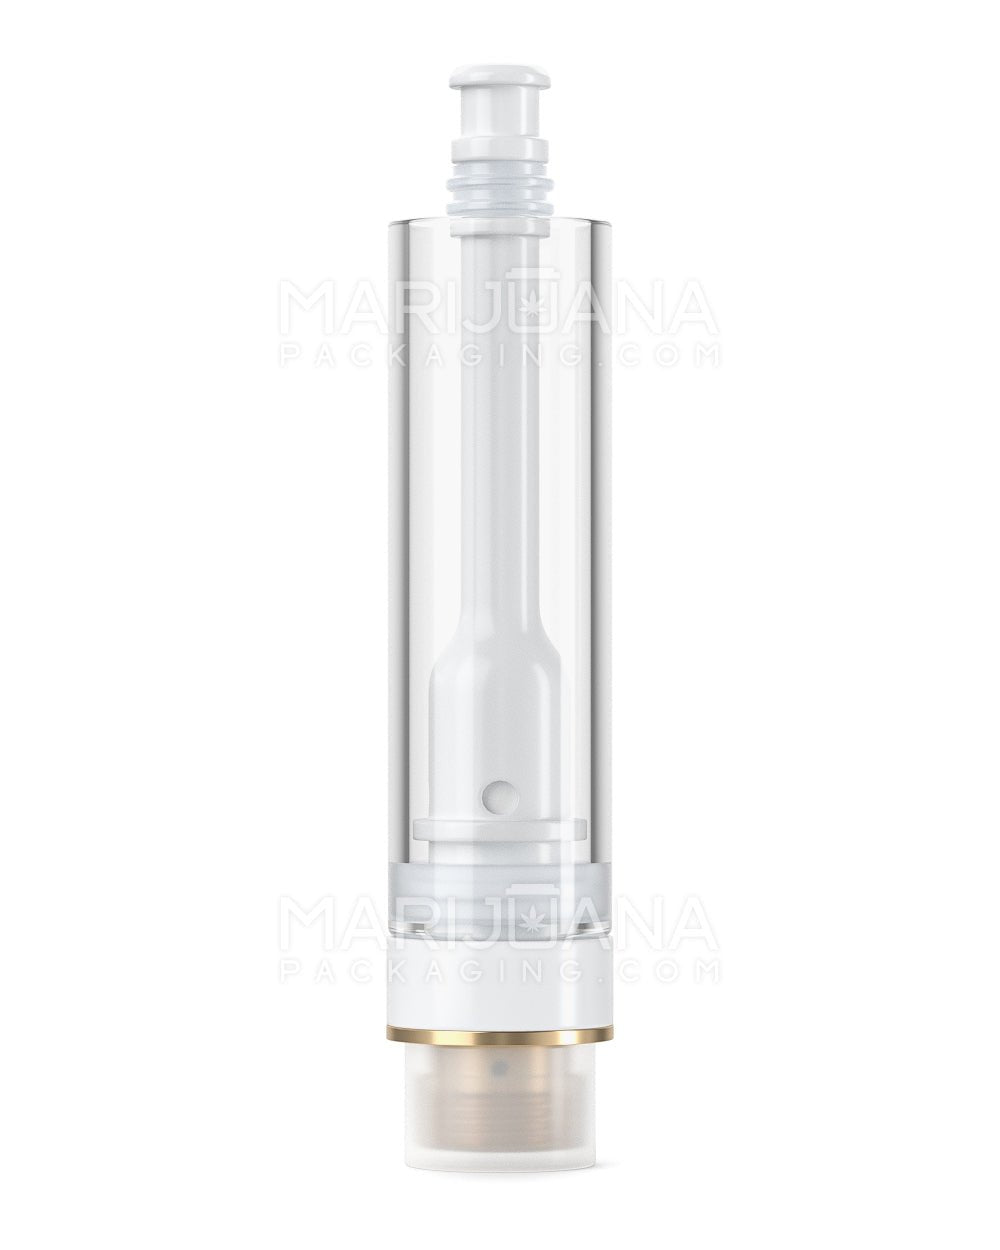 AVD | All Ceramic Vape Cartridge with 1.5mm Aperture | 1mL - Eazy Press - 1200 Count - 6